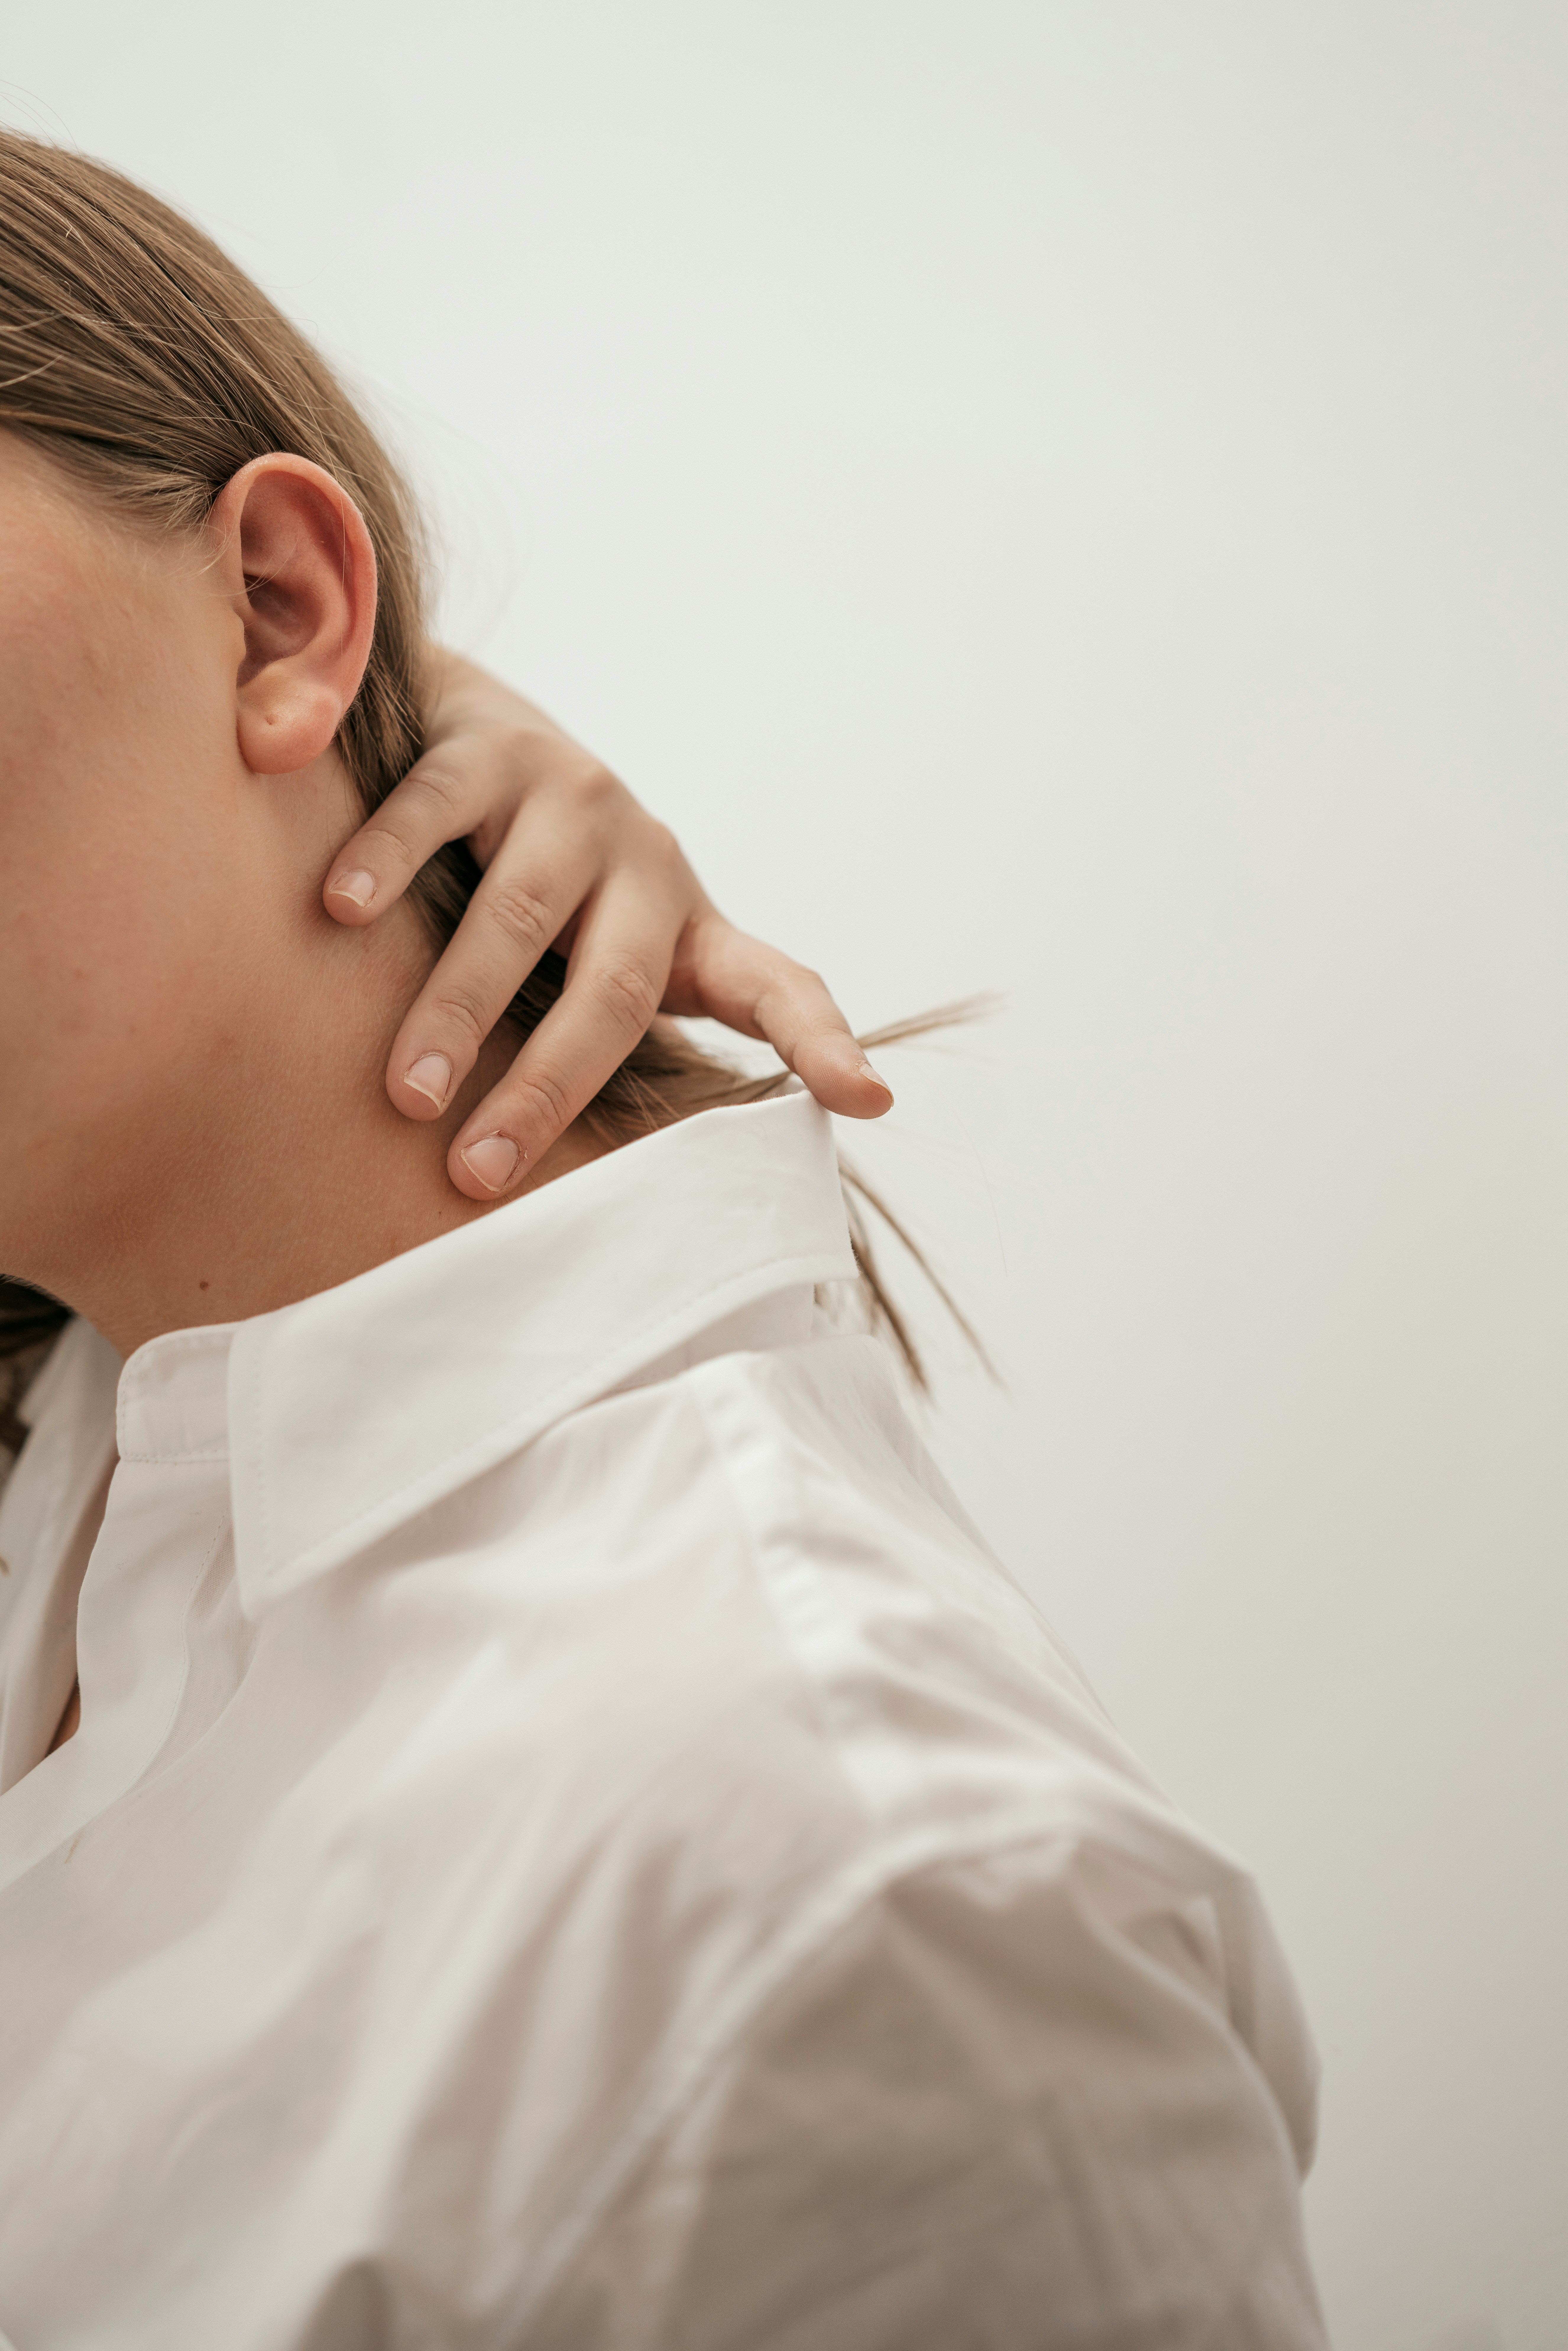 How Chiropractic Care Can Help With Neck Pain